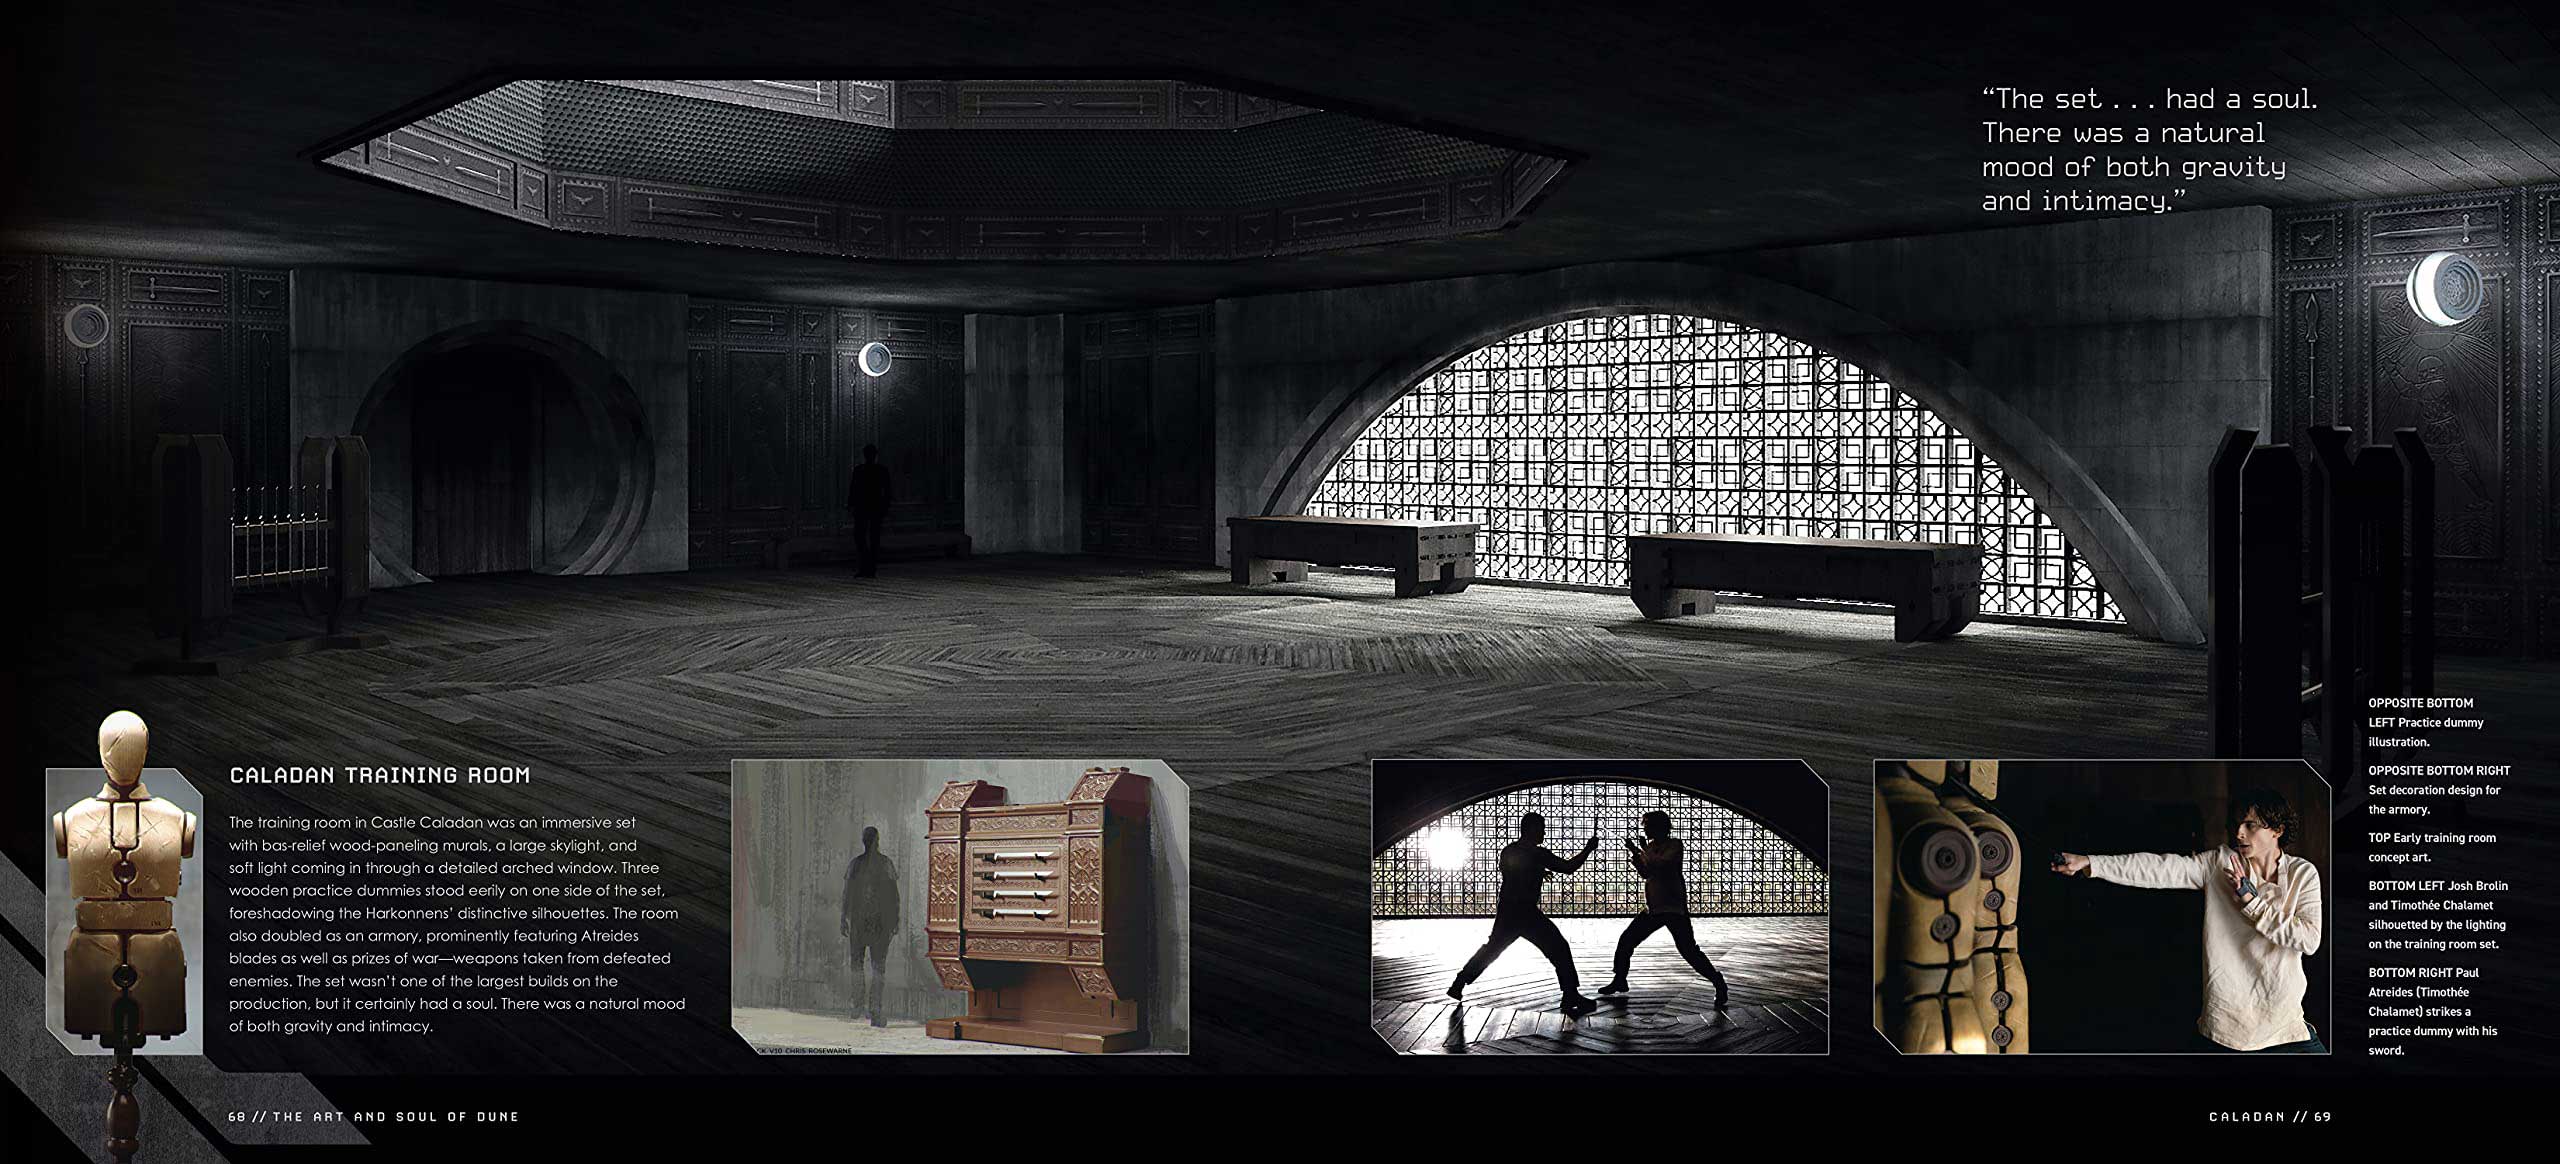 'The Art and Soul of Dune' pages 68 and 69, featuring the training room.